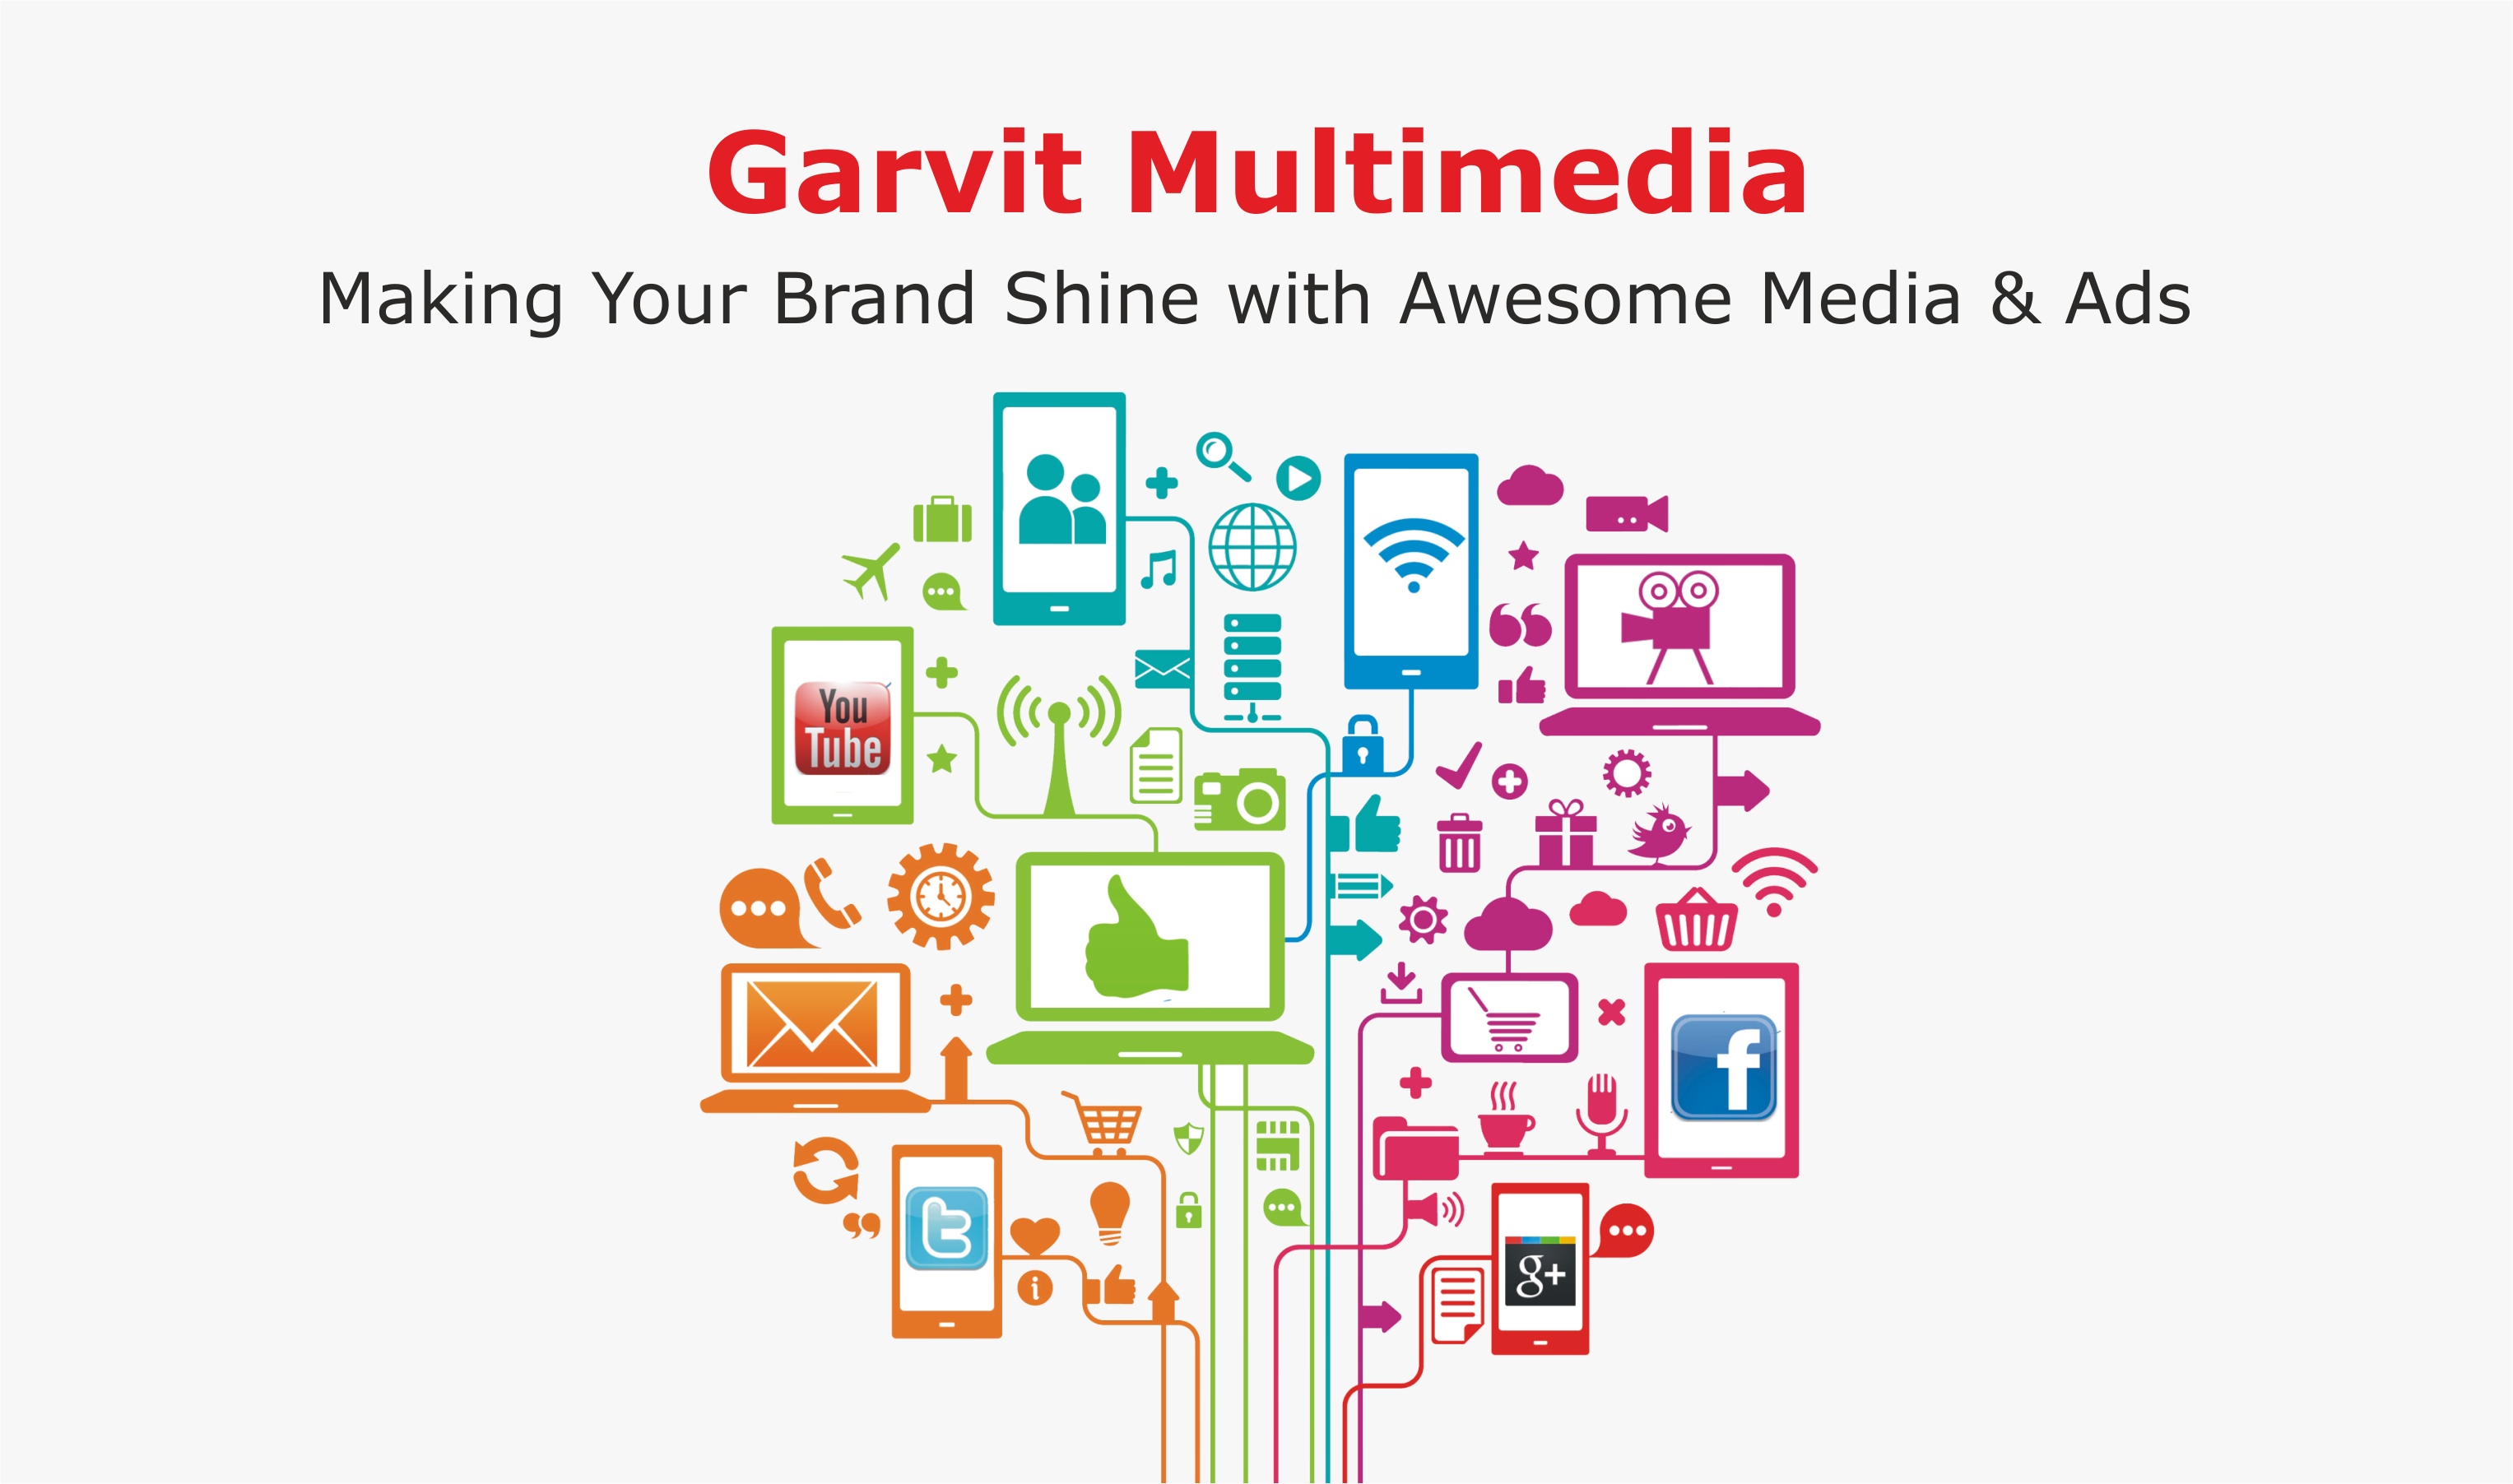 Garvit Multimedia: Making Your Brand Shine with Awesome Media & Ads